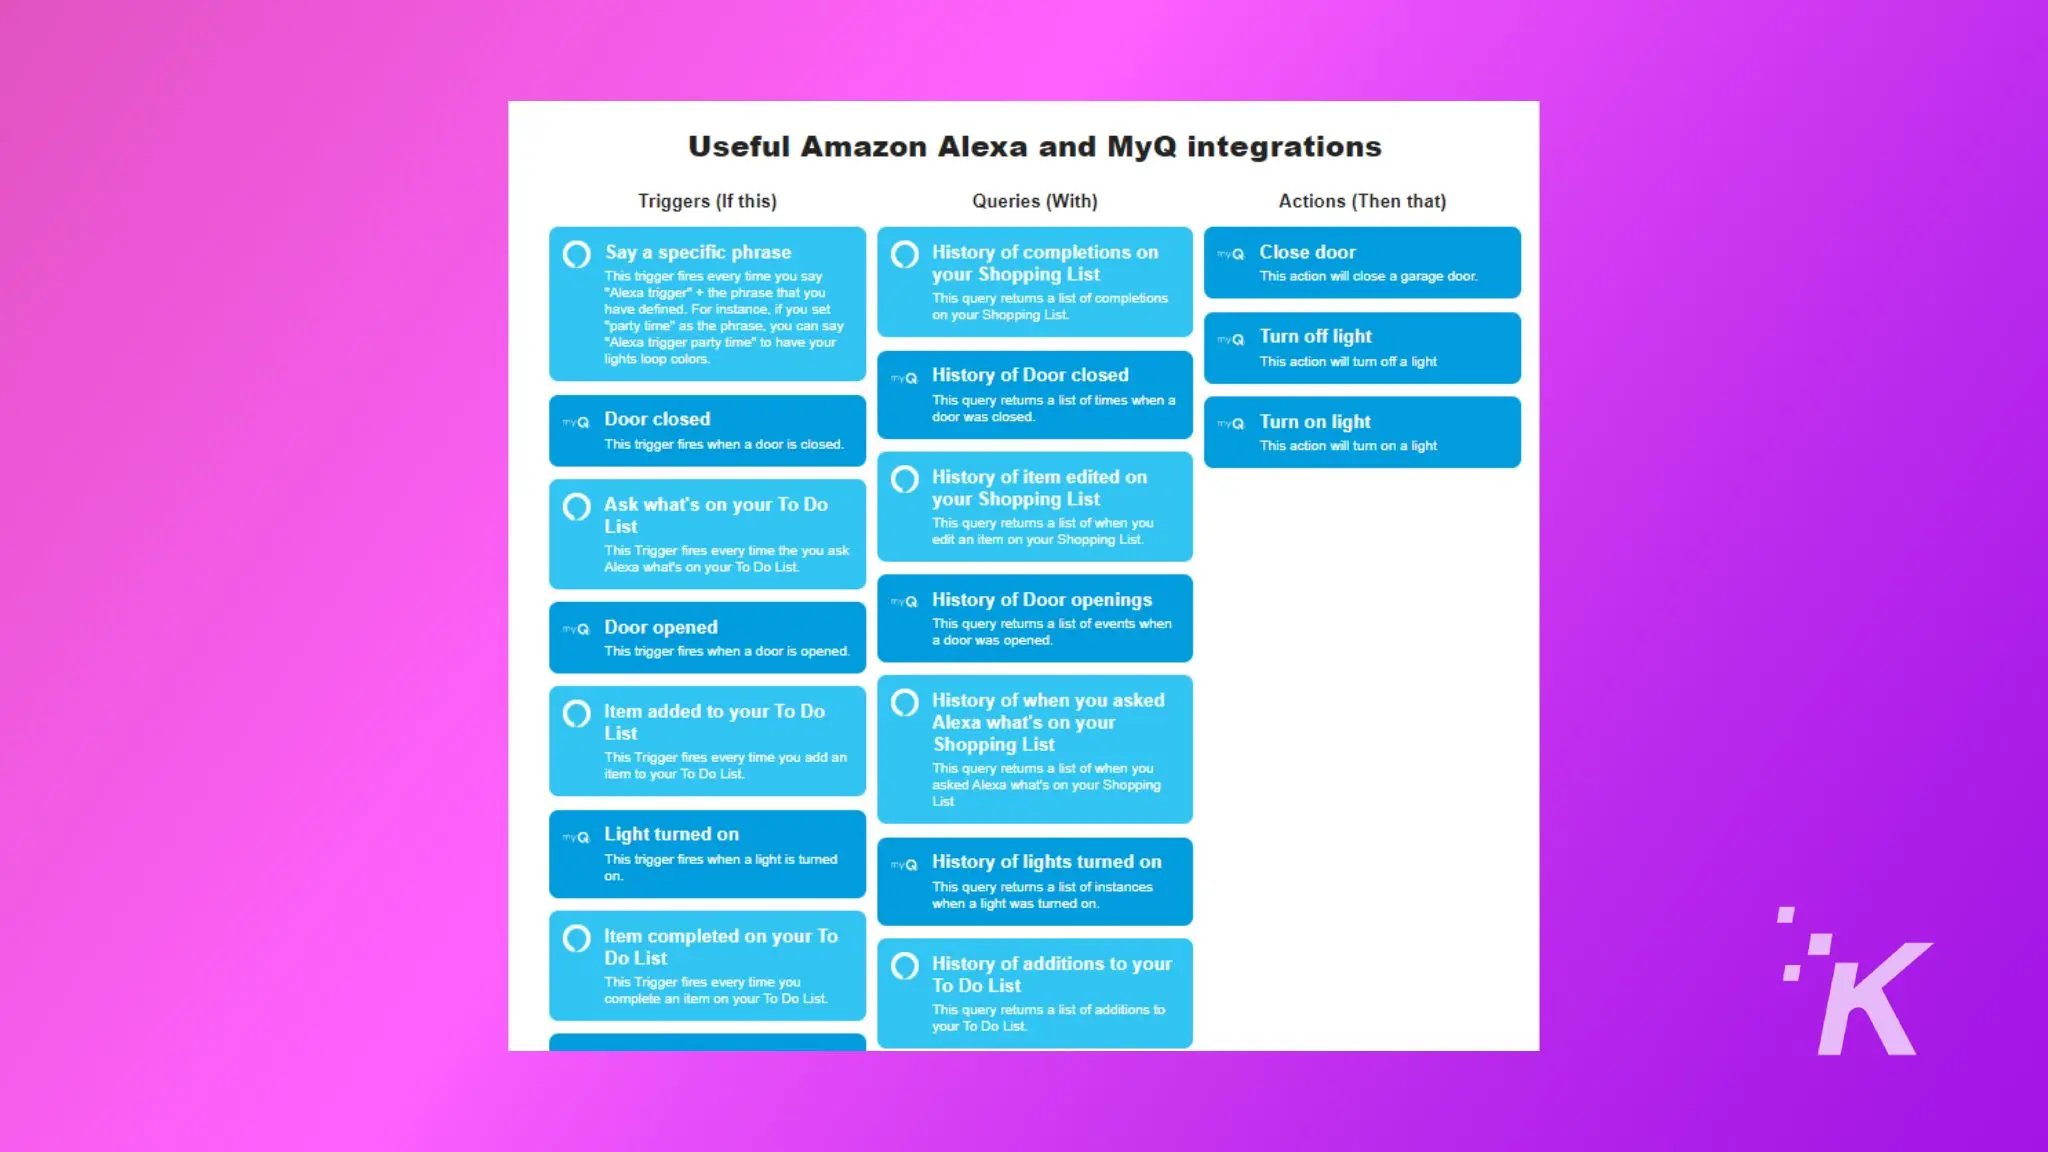 This image shows how Alexa and MyQ integrations can be used to trigger, query, and perform actions such as closing a door.